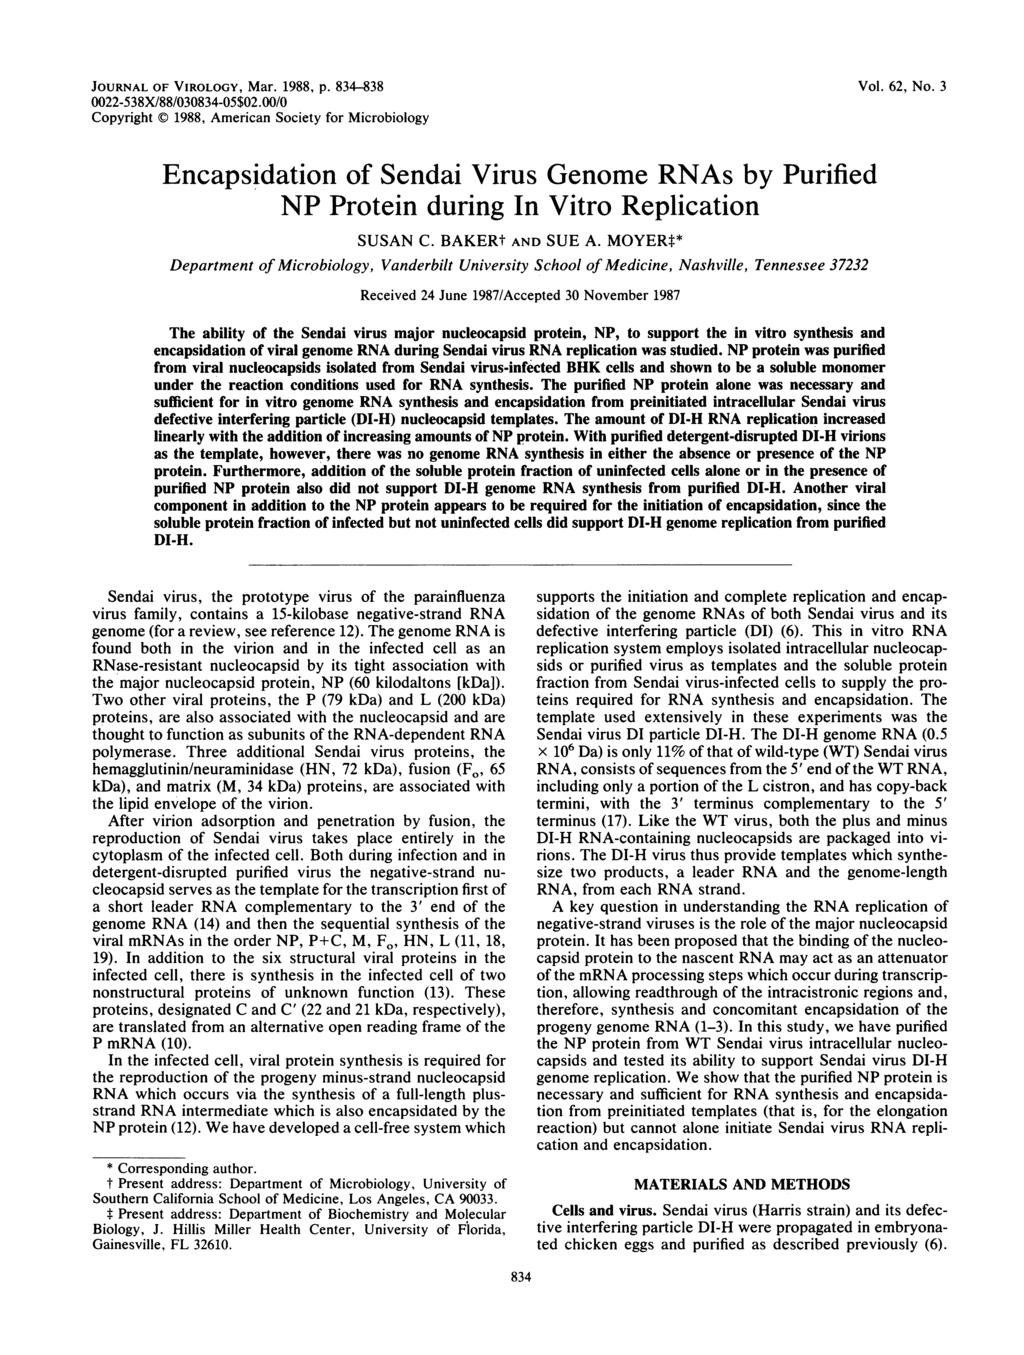 JOURNAL OF VIROLOGY, Mar. 1988, p. 834-838 22-538X/88/3834-5$2./ Copyright C) 1988, American Society for Microbiology Vol. 62, No.